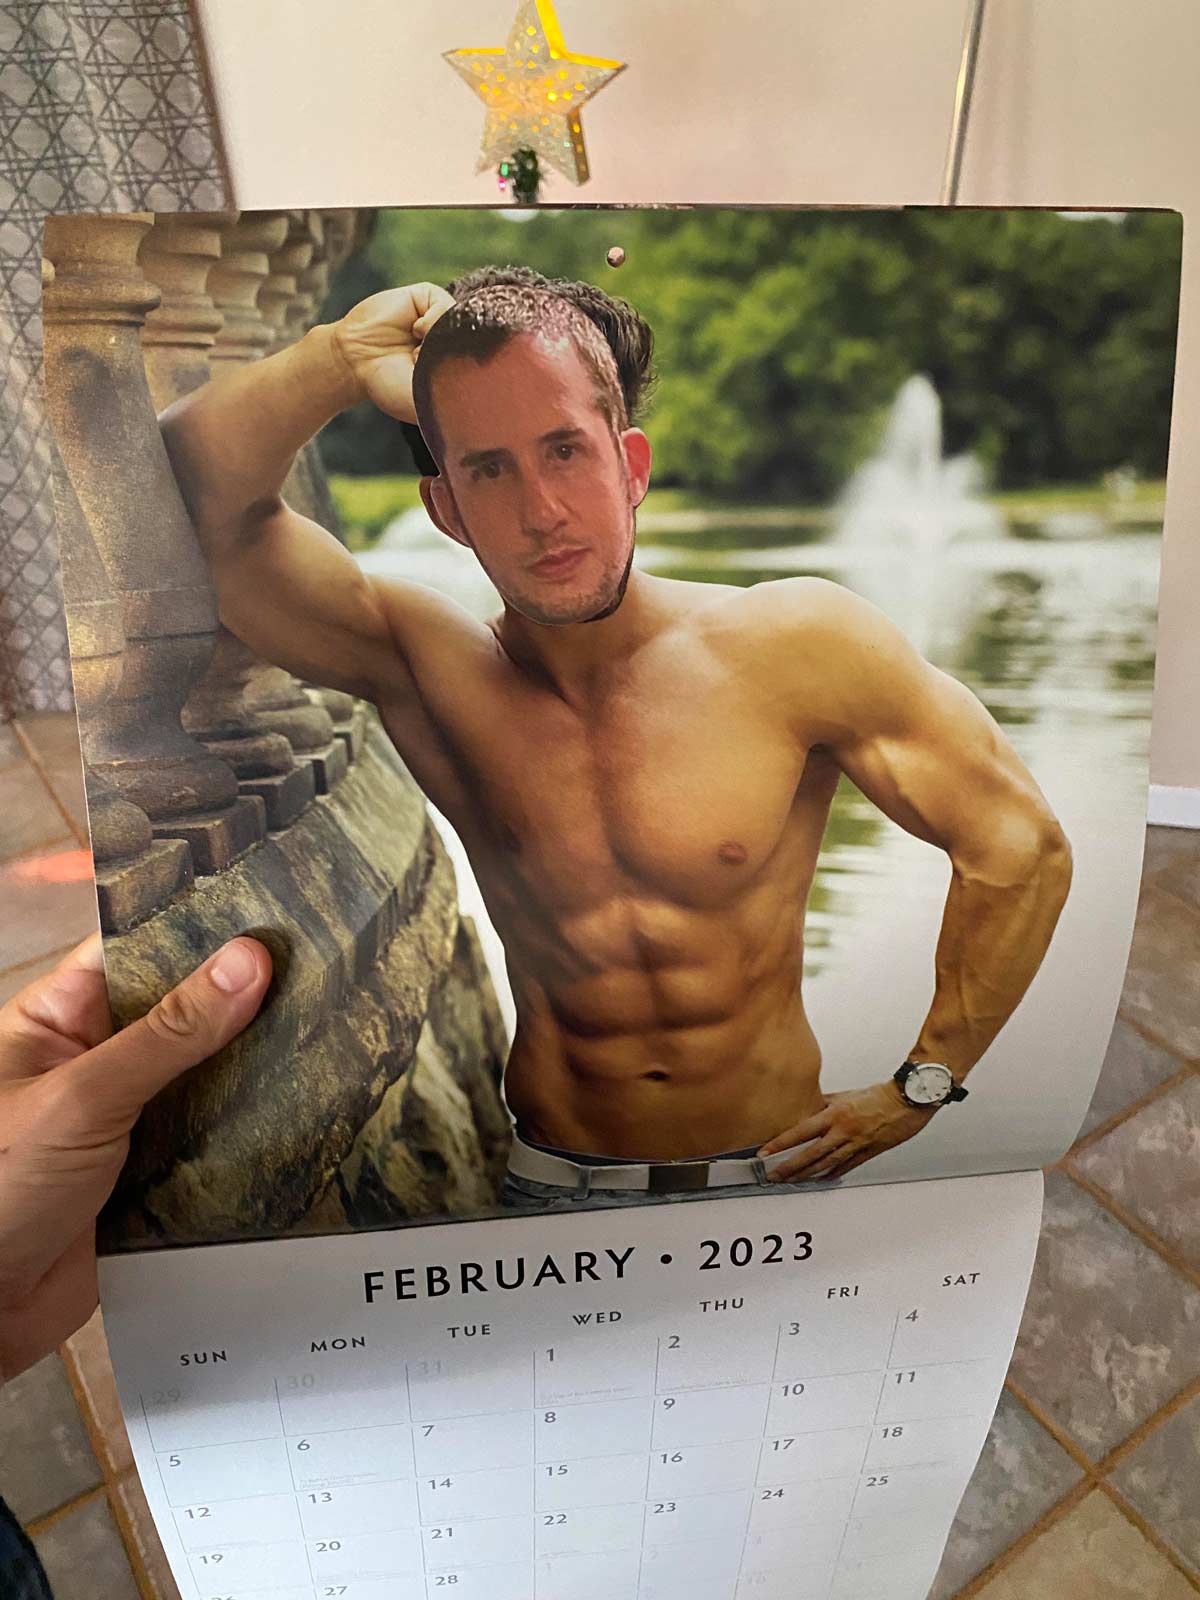 Every year I give my wife a hunky guy calendar with my face pasted on all the guys